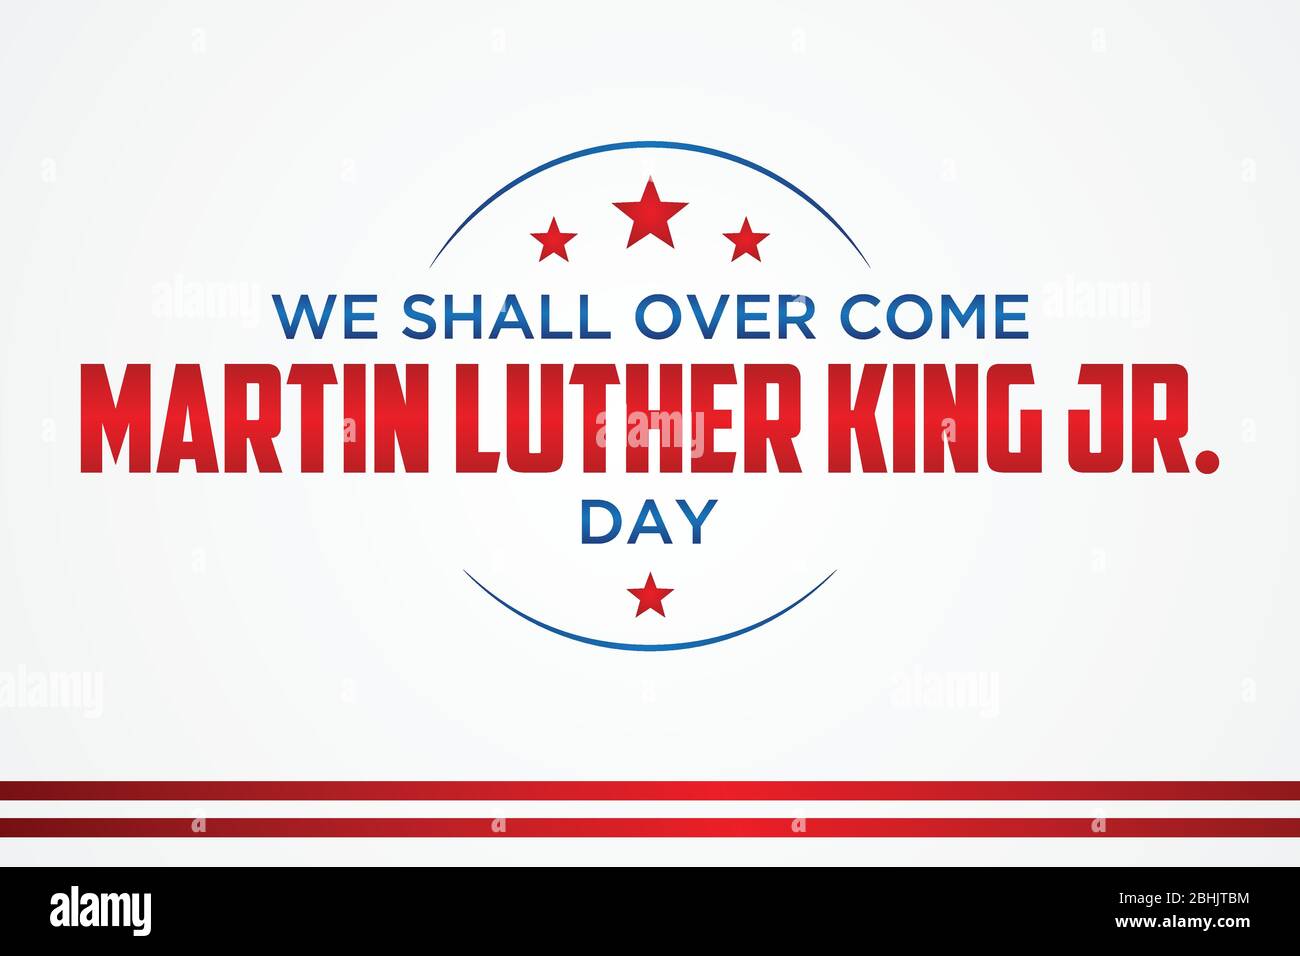 Simple letter emblem Martin Luther King Jr. day or MLK JR. Day inside the hexagon line. Design element greeting card, banner, poster, background and e Stock Vector